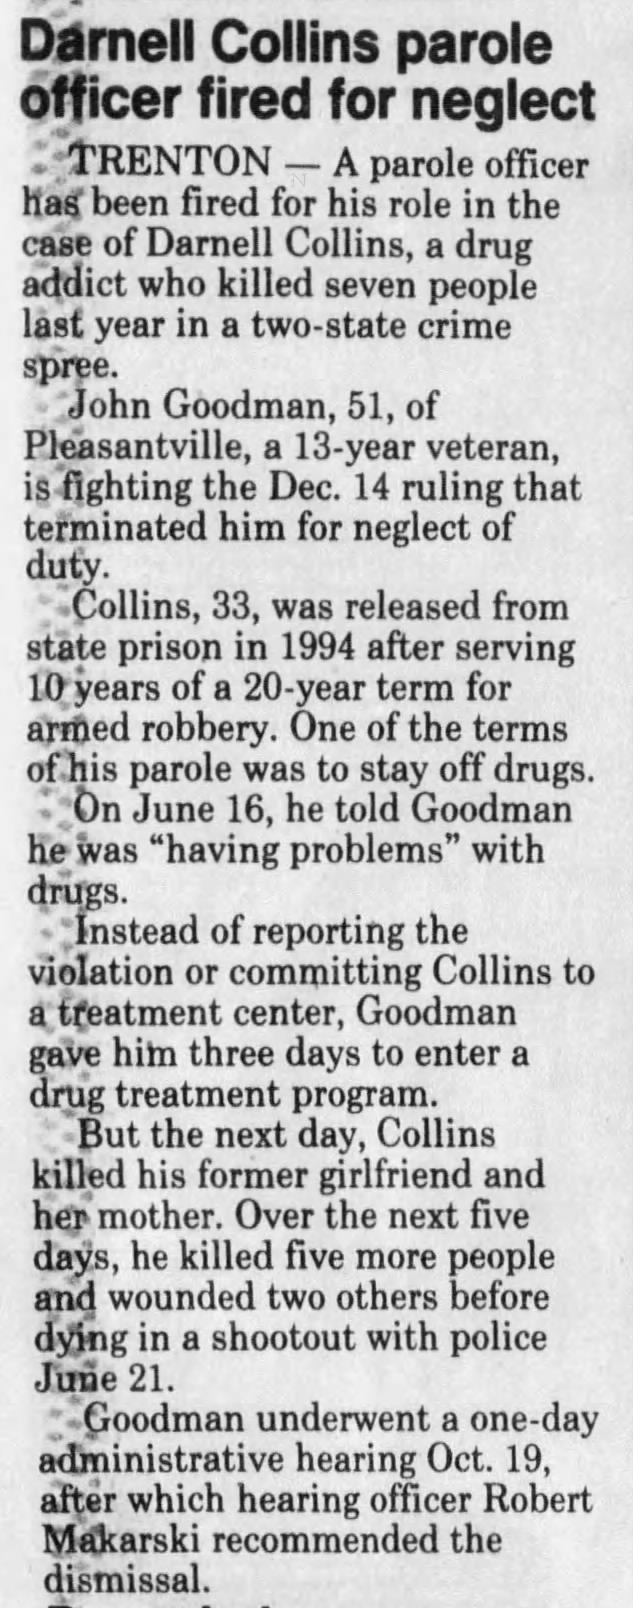 Darnell Collins parole officer fired for neglect